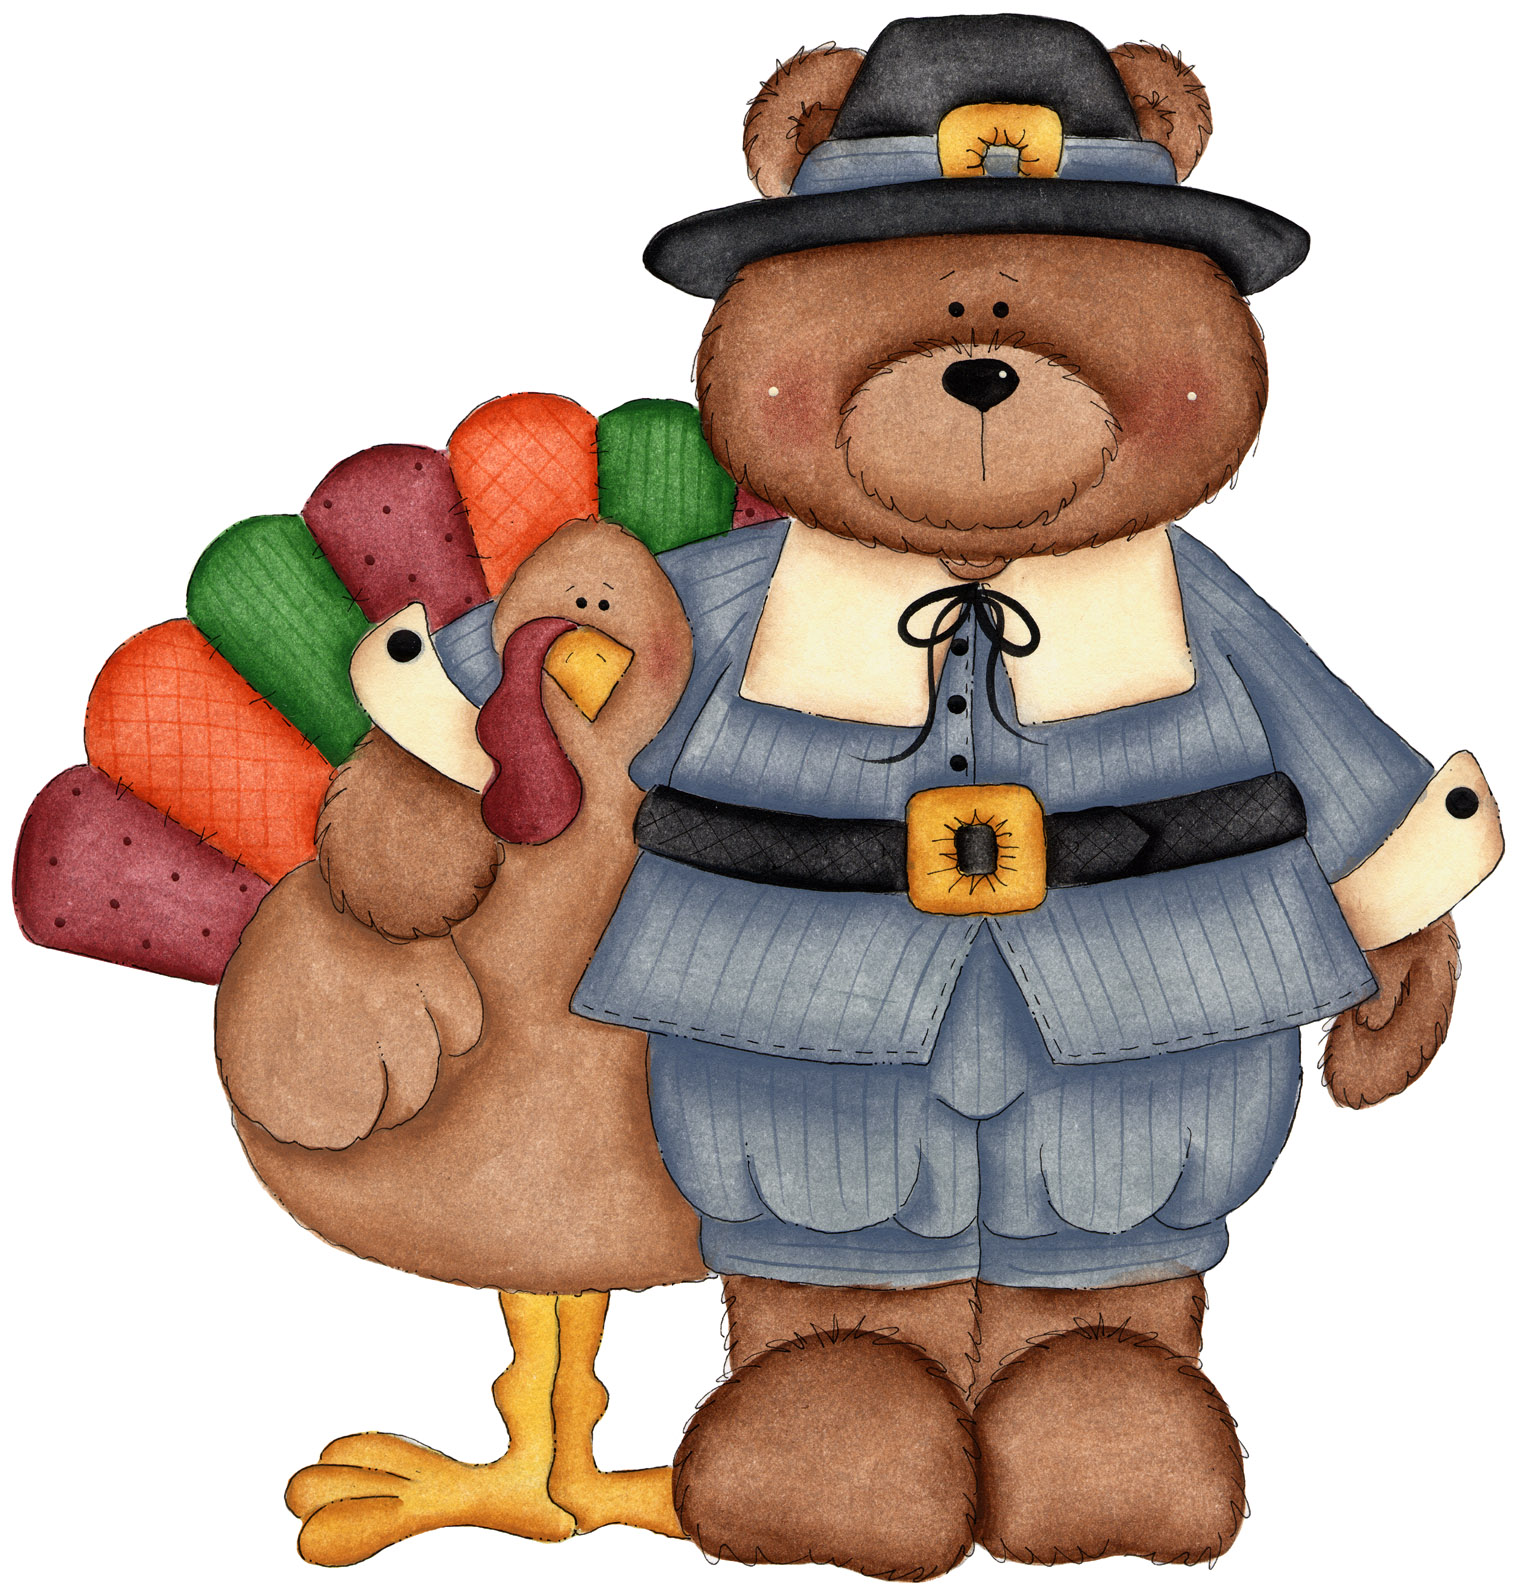 Thanksgiving Clip Art and Hot Pictures | Download Free Word, Excel ...